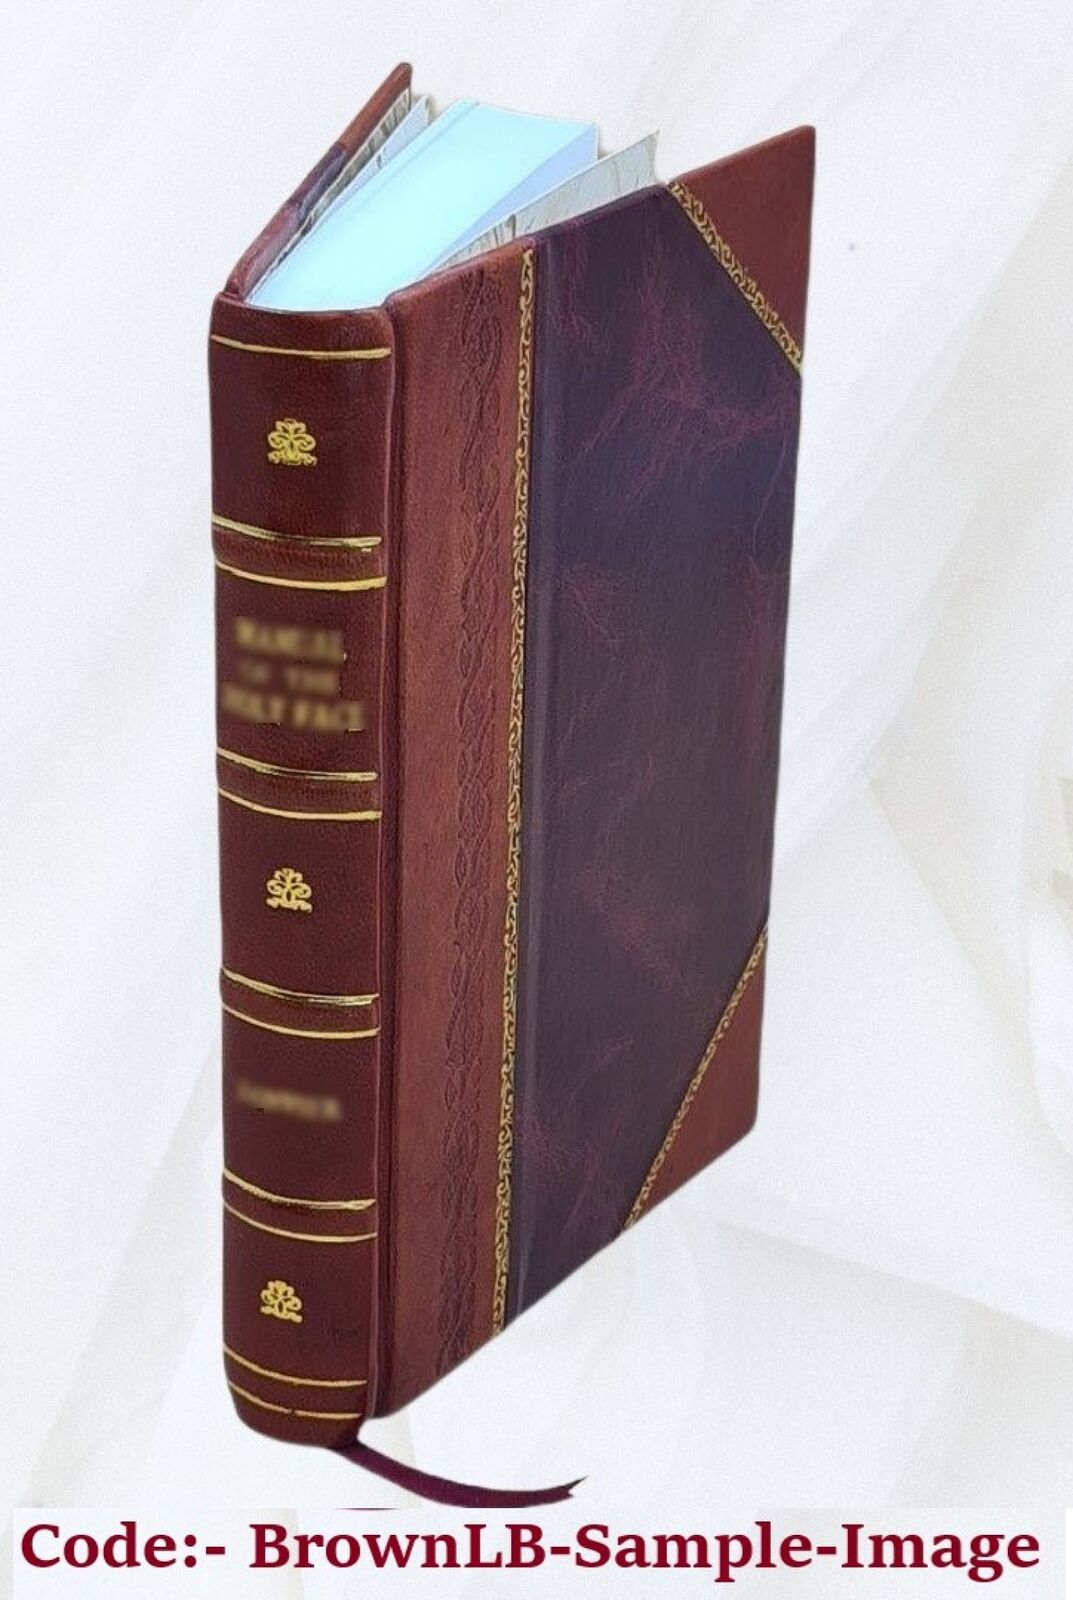 History of the Hume family 1903 by John RoberT Hume [Leather Bound]